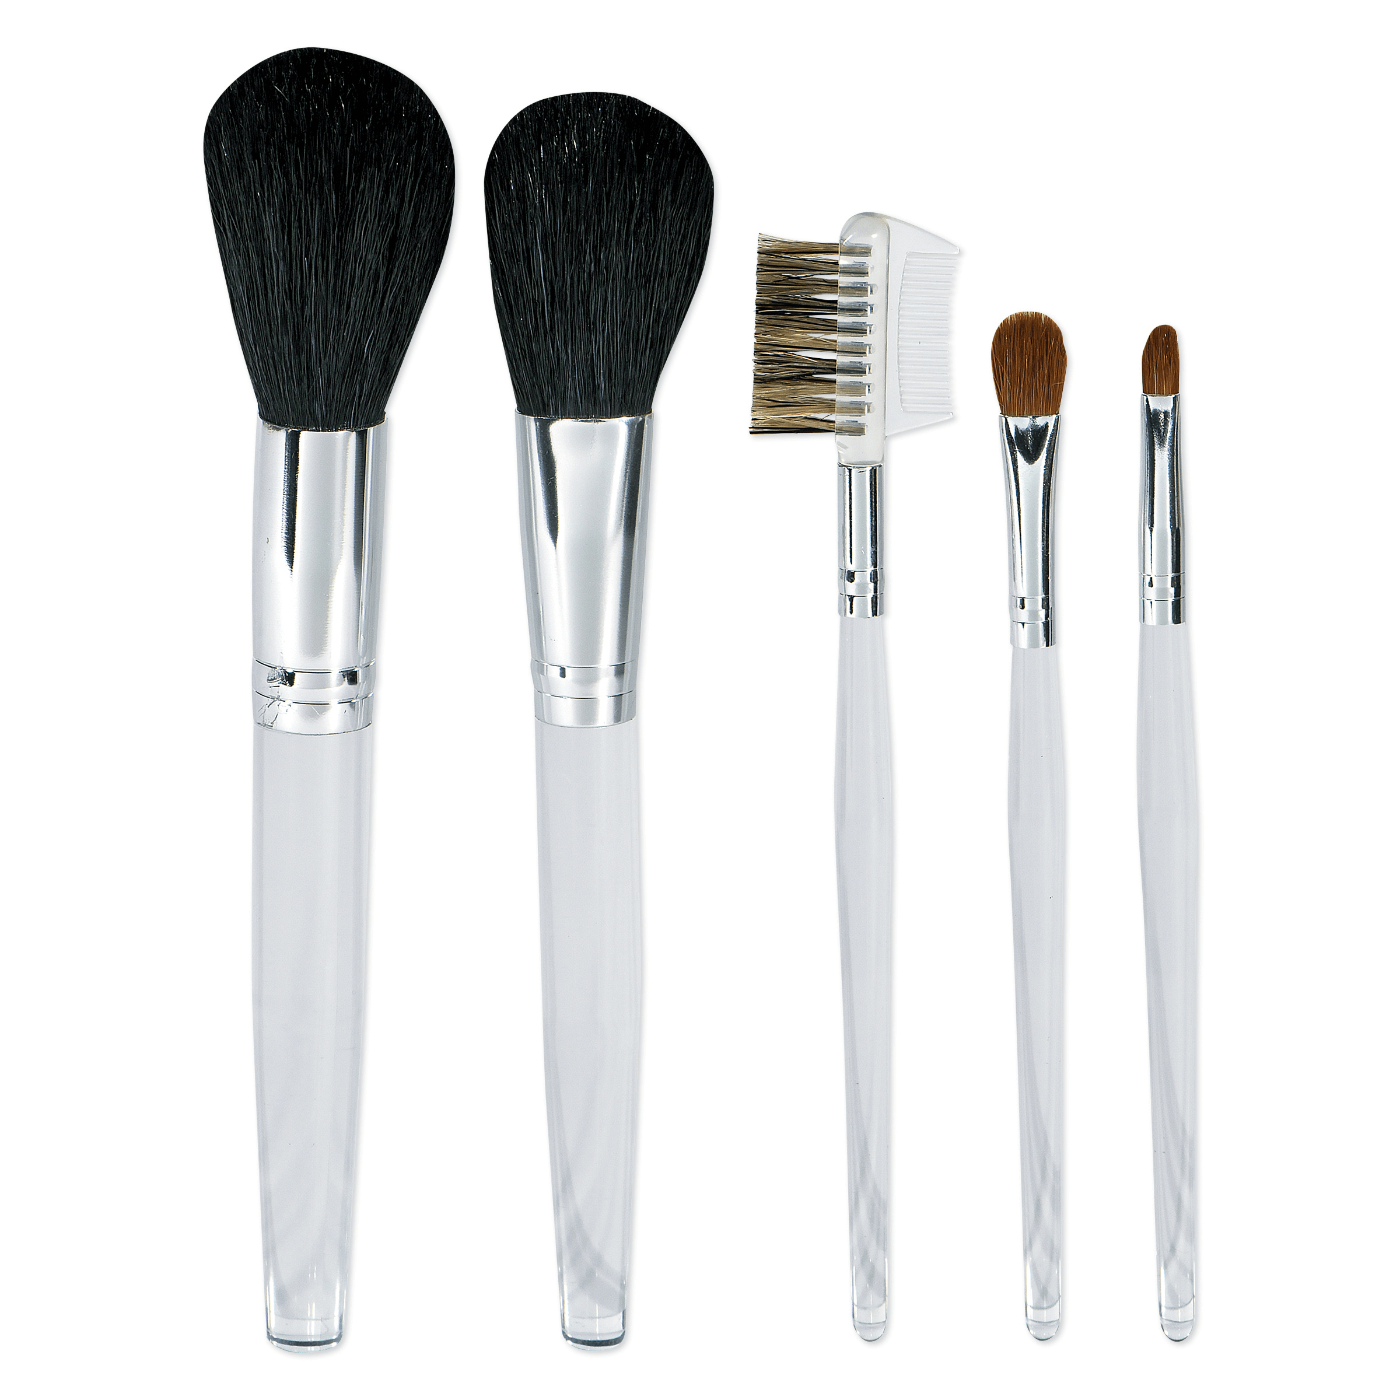 Professional Makeup Brush Set with Case - 5 pc.